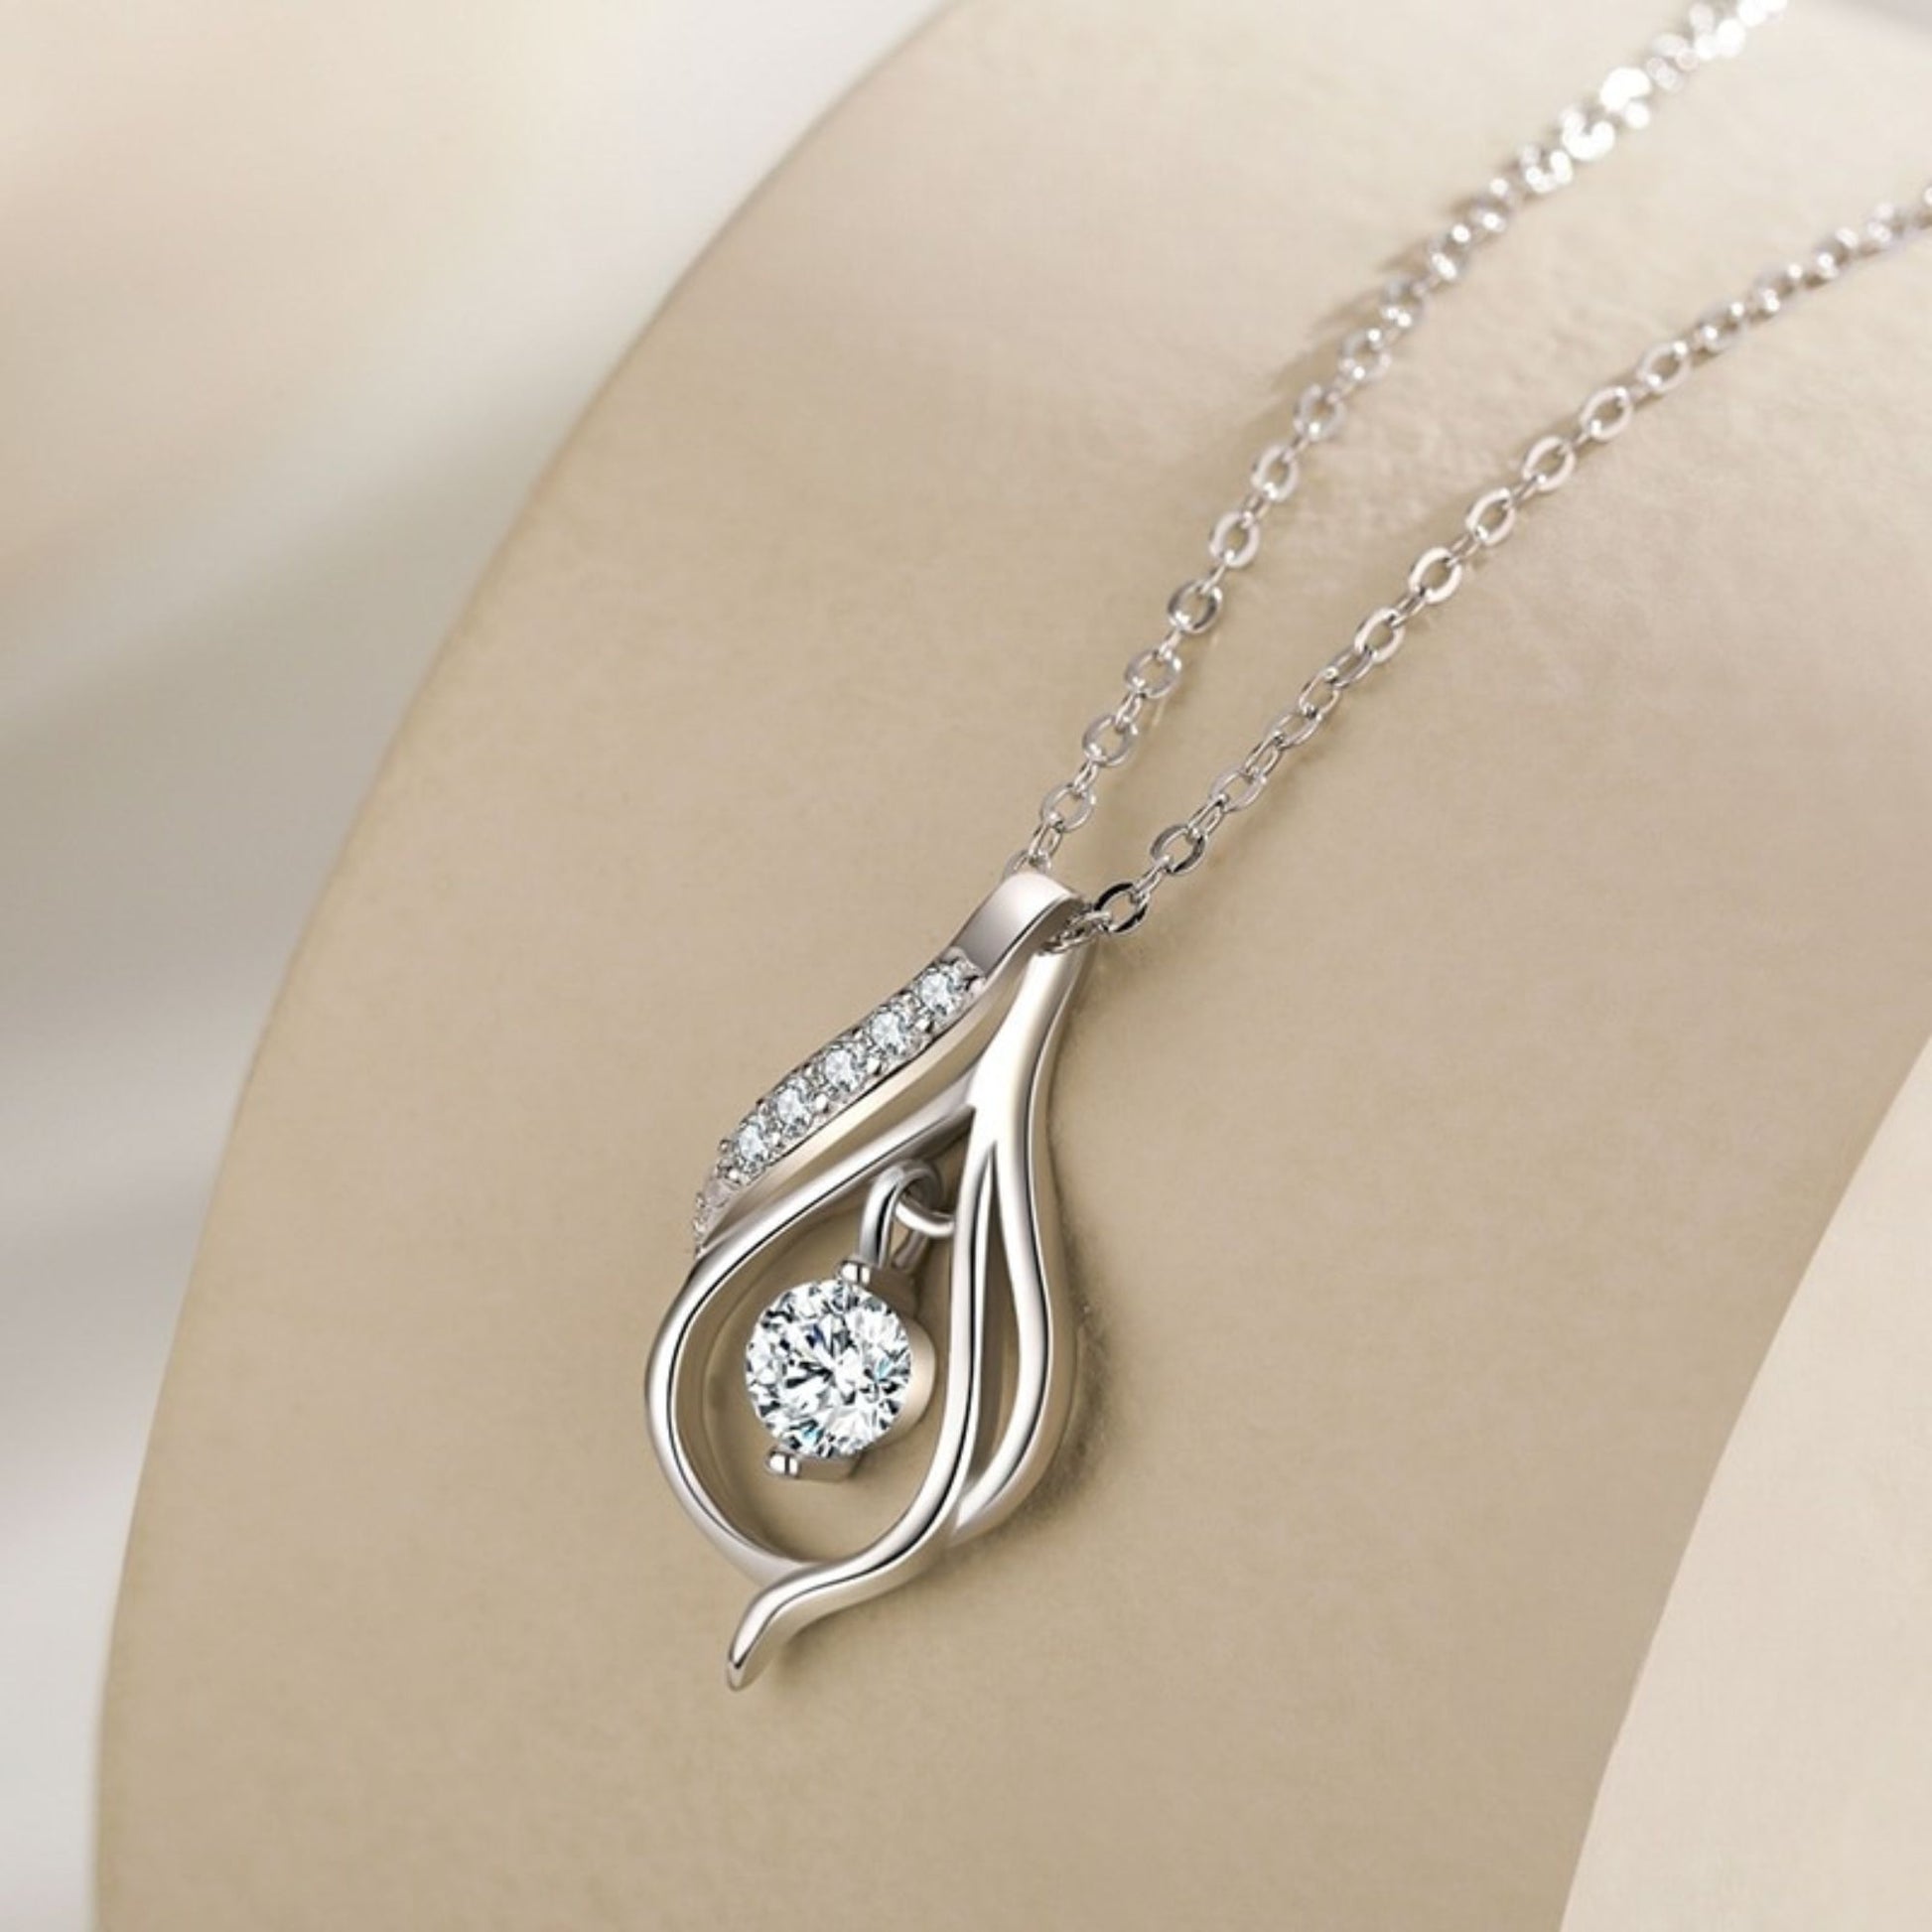 Boho Necklace - S925 Sterling Silver Necklace with Clear Zirconia Diamond Jewelry - Trendy Jewelry Gift